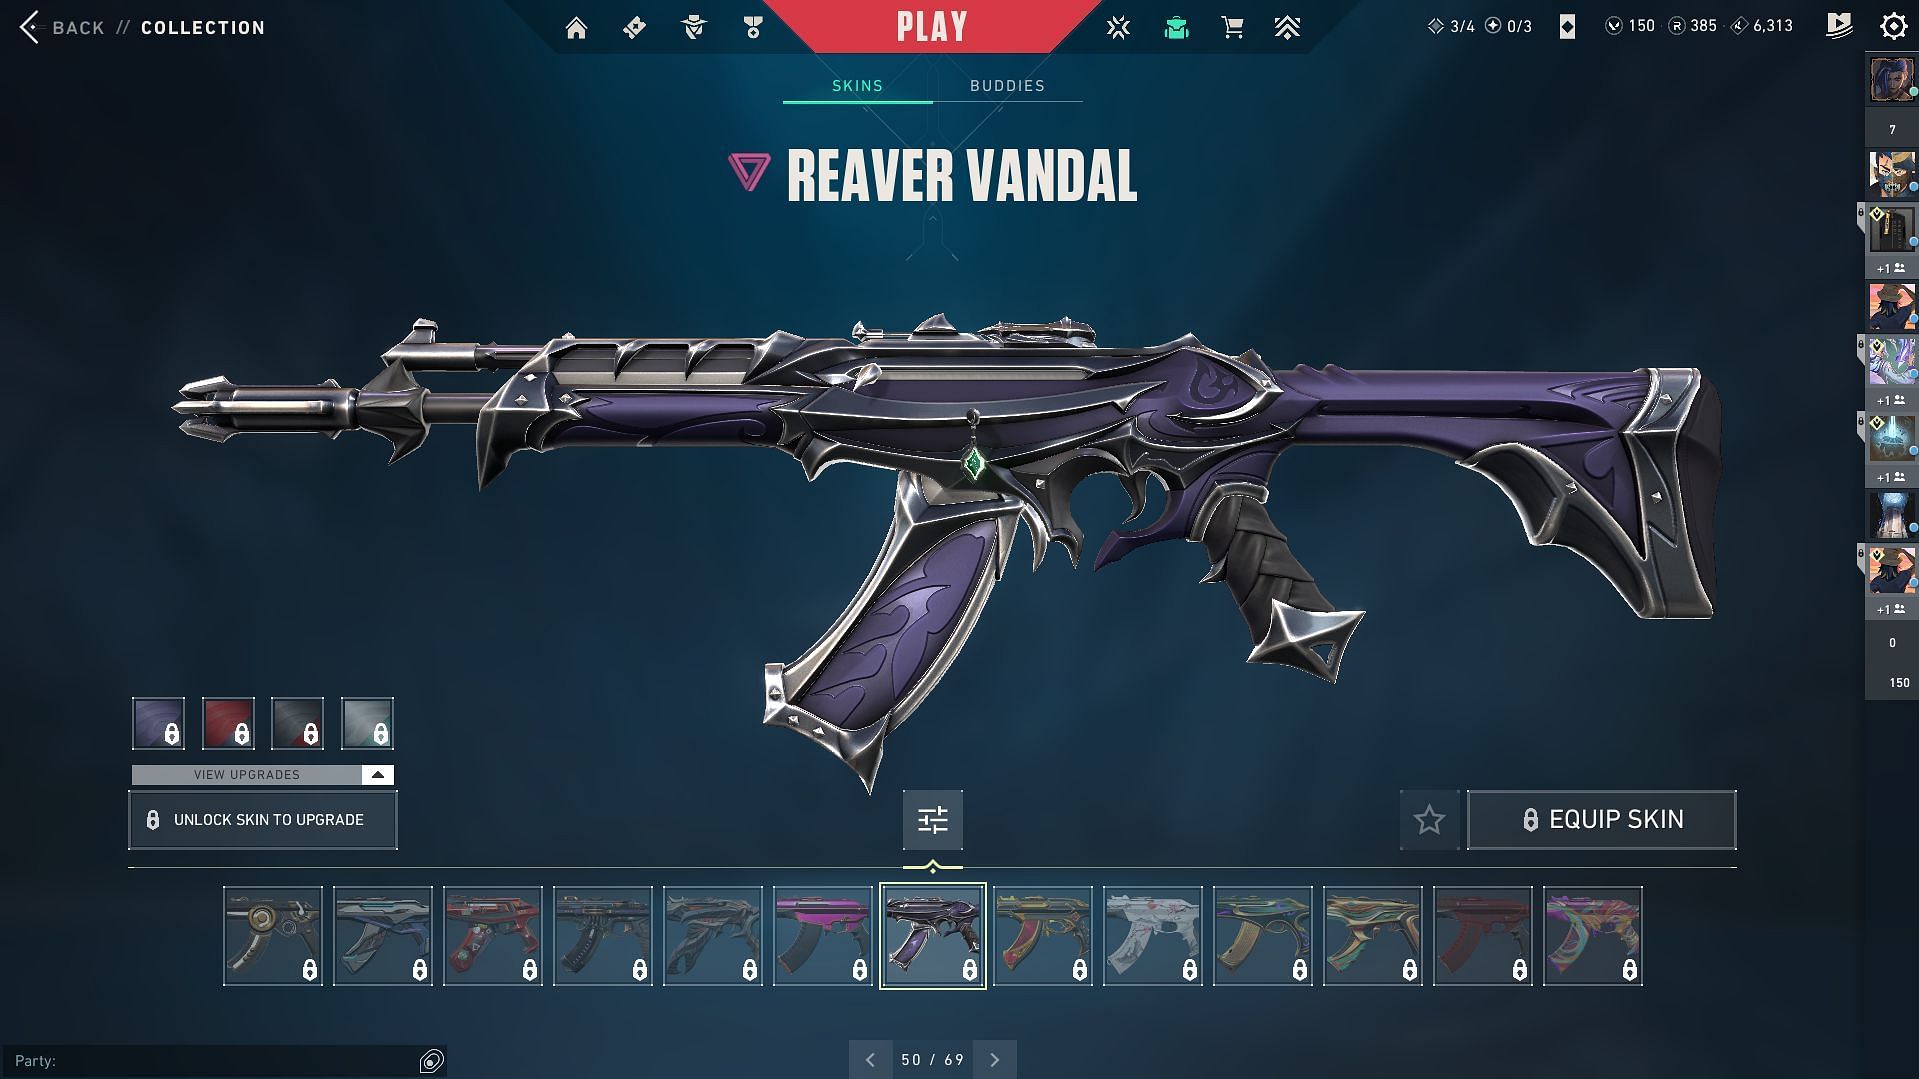 Reaver Vandal,  one of the premium Vandal skins available in-game (Image via Riot Games)